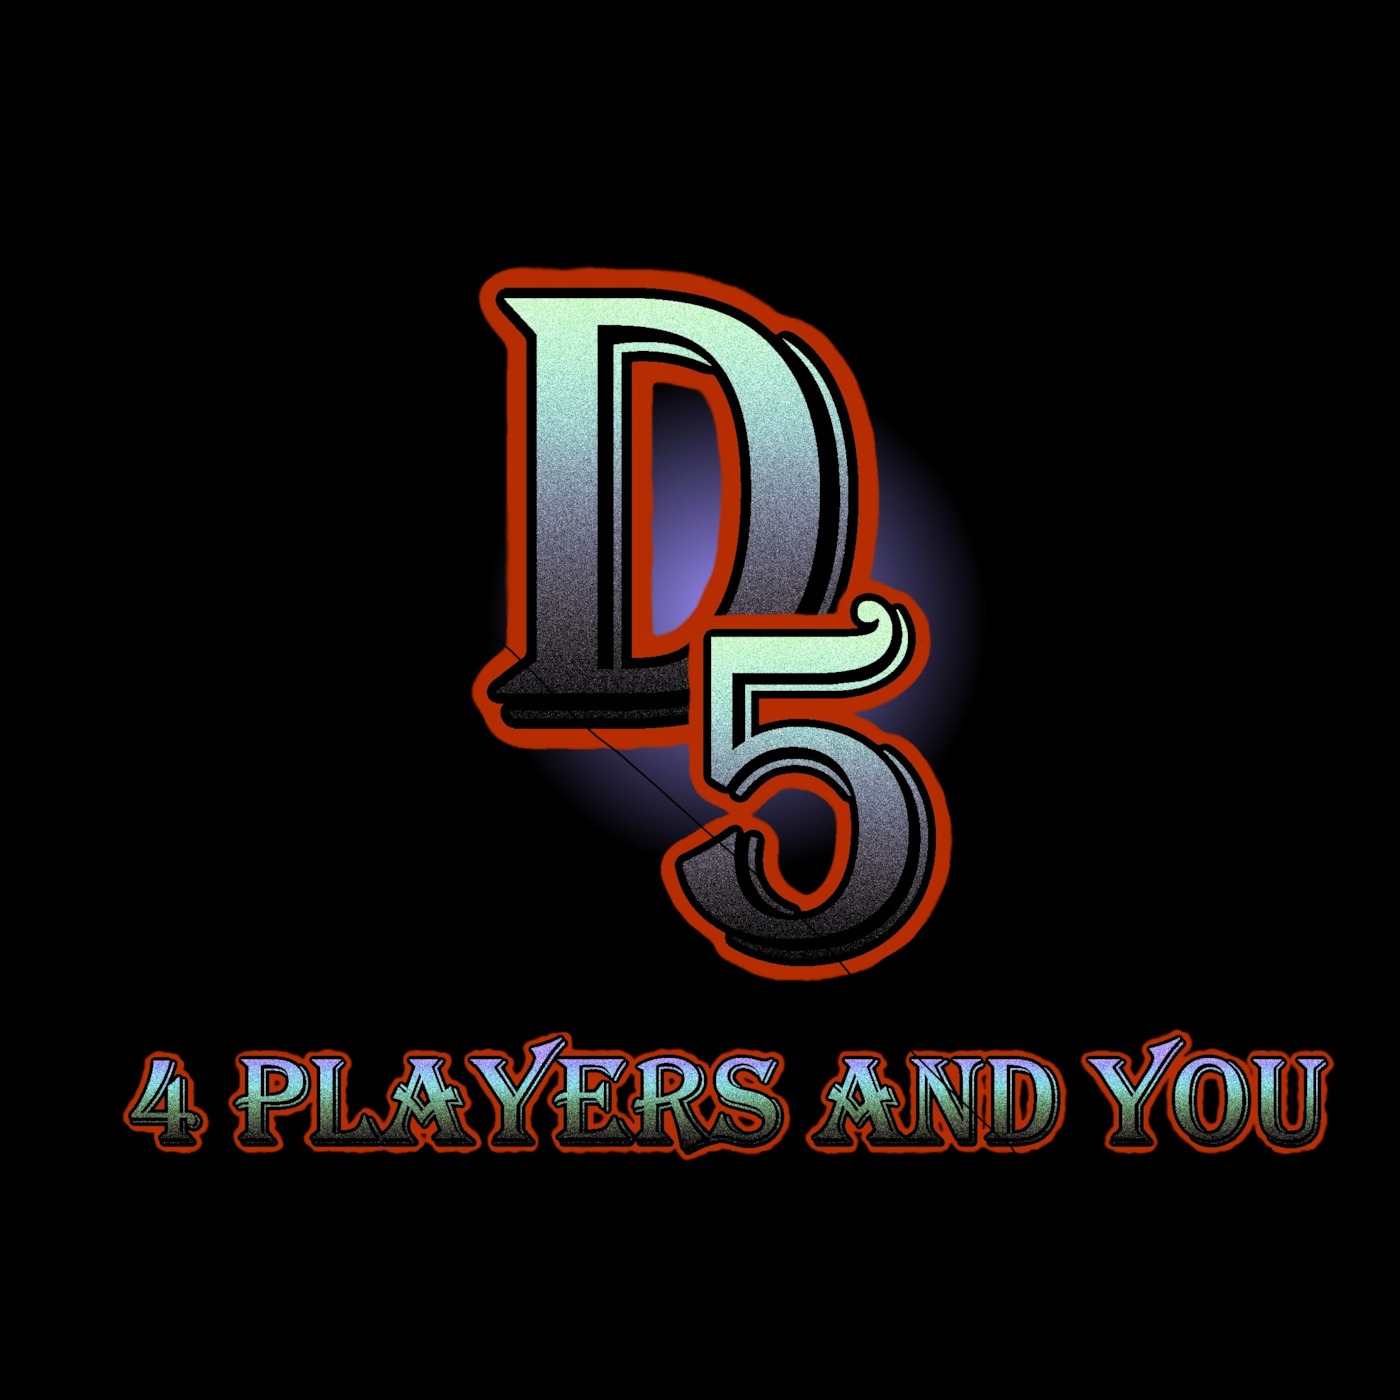 D5: 4 Players and You